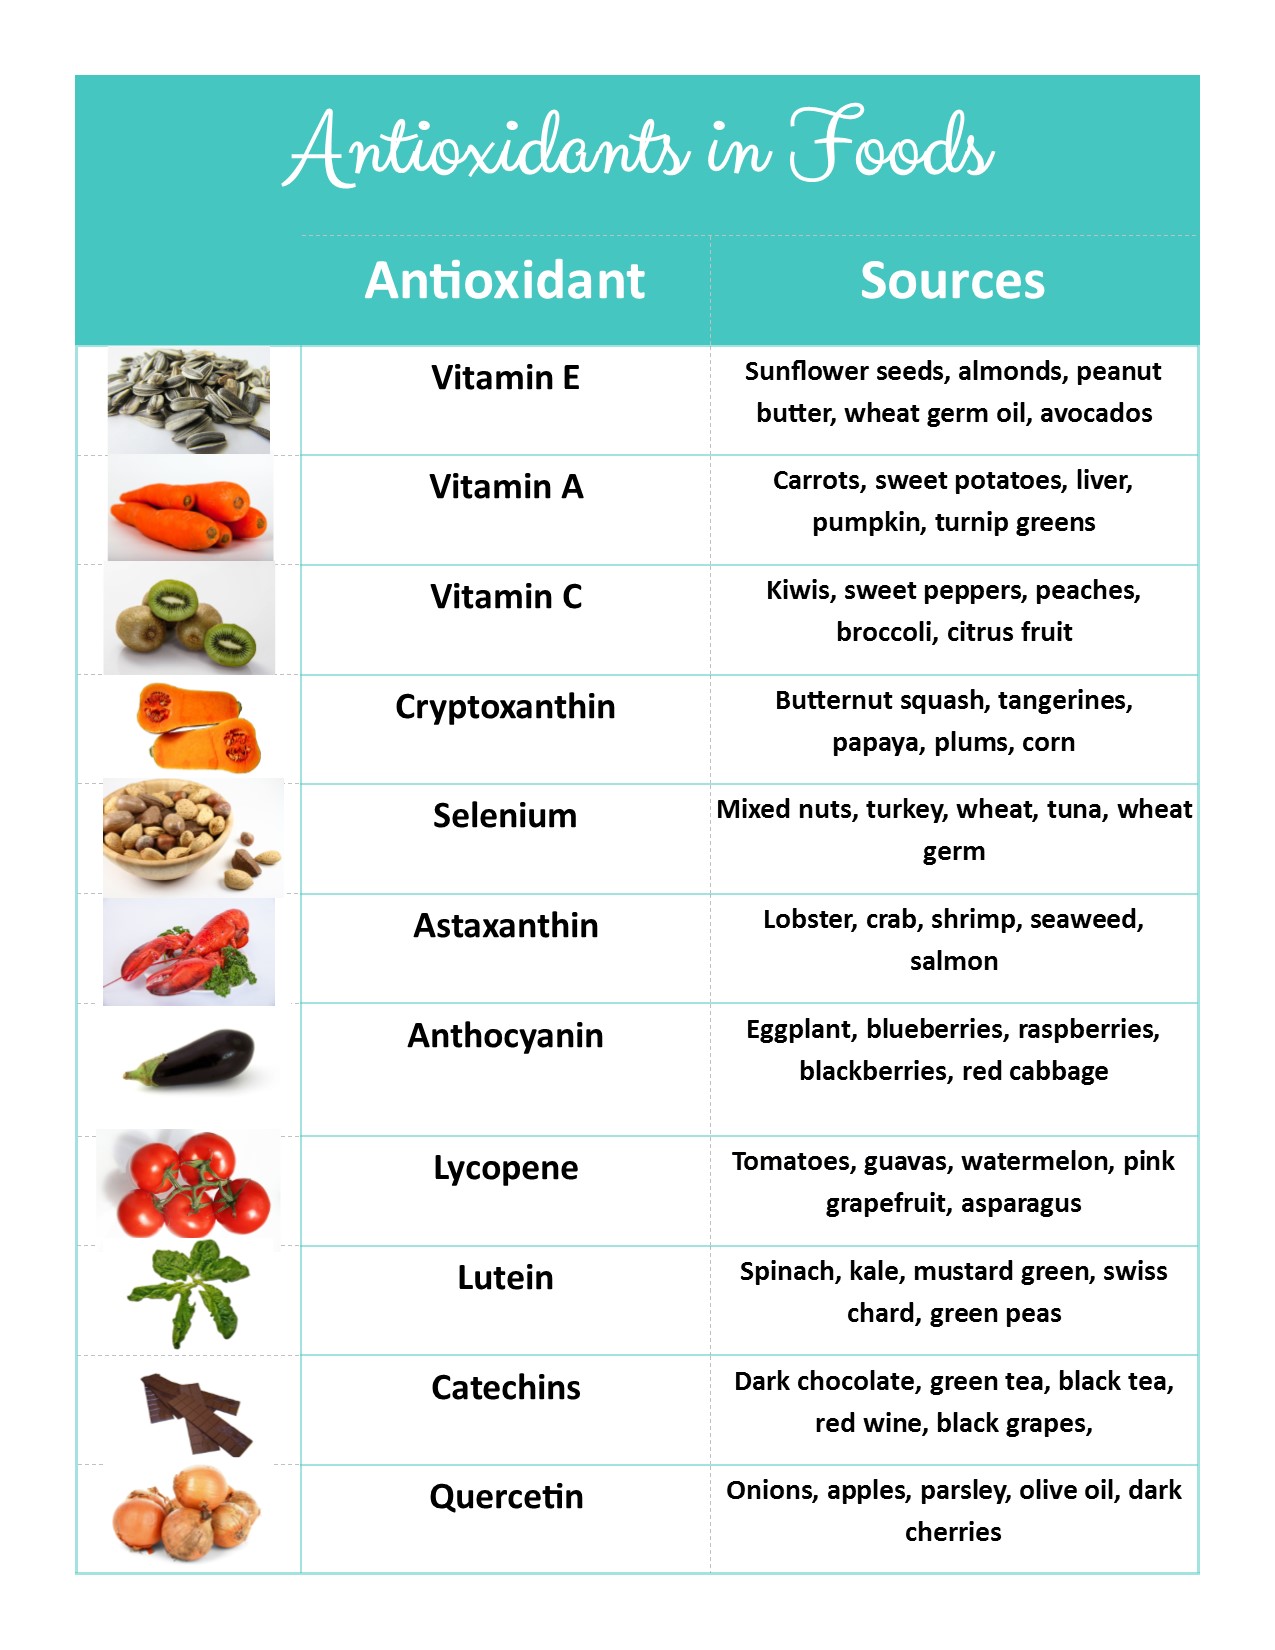 antioxidant rich foods foods high in antioxidants glutathione rich foods lycopene rich foods polyphenol rich foods foods high in flavonoids 40 foods high in antioxidants foods high in polyphenols quercetin rich foods flavonoid rich foods antioxidant rich fruits fruits high in antioxidants foods high in glutathione flavonoid foods food that is rich in phytochemicals and antioxidants foods high in lutein foods that are rich in polyphenols foods high in lycopene rich in antioxidants antioxidant rich foods for skin glutathione rich fruits most antioxidant rich foods antioxidant rich foods list high in antioxidants anthocyanin rich foods foods high in carotenoids resveratrol rich foods foods with most antioxidants antioxidant rich vegetables vegetables high in antioxidants drinks high in antioxidants carotenoid rich foods foods rich in lutein antioxidant rich diet glutathione containing foods alpha lipoic acid rich foods foods naturally rich in glutathione food that is rich in phytochemicals and antioxidants brainly eat foods rich in antioxidants food high in quercetin antioxidant rich foods in tamil astaxanthin rich foods foods high in antioxidants chart fruits with high polyphenols rich source of antioxidants glutathione rich fruits for skin whitening high antioxidant diet fruits and vegetables high in antioxidants foods highest in antioxidants chart ergothioneine rich foods antioxidant rich fruits and vegetables foods high in lutein and zeaxanthin foods high in antioxidants list dietary sources of antioxidants include fruits rich in lycopene quercetin rich foods list antioxidant rich drinks oxidant rich foods foods high in antioxidants for skin foods high in oxidants foods rich in anti oxidants foods high in anti oxidants catechin rich foods glutathione rich foods for skin whitening in tamil glutathione rich vegetables flavonoid rich foods list berries rich in antioxidants vegetables high in polyphenols foods rich in phytochemicals and antioxidants polyphenol rich diet foods high in polyphenols list highest source of antioxidants fruits high in antioxidants and anthocyanins foods highest in anthocyanins veggies high in antioxidants which fruits contain glutathione fruits rich in flavonoids foods rich in antioxidants for hair best antioxidant rich foods antioxidant rich foods for hair glutathione high foods glutathione enriched foods the most antioxidant rich foods foods rich in antioxidants for pregnancy glutathione rich fruits and vegetables astaxanthin rich vegetarian foods plants rich in antioxidants glutathione rich foods in tamil anthocyanin rich fruits fruits that contain glutathione things high in antioxidants foods with rich antioxidants fruits and veggies high in antioxidants kaempferol rich foods vegetables high in flavonoids antioxidant rich dry fruits polyphenols rich foods list foods that high in antioxidants nuts rich in antioxidants antioxidant rich diet plan foods with most flavonoids lycopene rich foods list richest dietary source of ergothioneine vegetables rich in glutathione food that is rich in antioxidants nasunin rich foods foods in high antioxidants polyphenol rich fruits antioxidant rich nuts food that is high in antioxidants fruits and vegetables high in flavonoids antioxidant rich meals flavonoids containing foods dietary sources of antioxidants antioxidant containing foods which fruits contain antioxidants foods rich in antioxidant vitamins include antioxidant rich veggies high antioxidant diet plan highest source of polyphenols antioxidant rich foods benefits herbs rich in antioxidants fruits high in quercetin lycopene is rich in fruits rich in antioxidants for skin ellagic acid rich foods foods with highest antioxidant concentration fruits high in lycopene food rich in lutein and zeaxanthin foods that are rich in glutathione fruits high in antioxidants and vitamin c fruits high in glutathione dietary sources of glutathione most antioxidant rich fruit foods high in flavonoids and carotenoids foods high in ergothioneine polyphenols foods high in dry fruits rich in antioxidants food that rich in phytochemicals and antioxidants foods rich in flavonoids and antioxidants food with a lot of antioxidants foods with high levels of polyphenols foods high in fiber and antioxidants foods that have high antioxidants flavonoid rich diet glutathione antioxidant rich foods orac rich foods antioxidant enriched foods food rich of antioxidants glutathione rich foods list plants high in antioxidants vitamins rich in antioxidants fruits that high in antioxidant rich source of glutathione food with high oxidants foods which are rich in antioxidants list of foods high in flavonoids catalase enzyme rich foods examples of antioxidant rich foods rich glutathione foods things rich in antioxidants fruits that rich in antioxidants rich antioxidant vegetables food that rich in glutathione antioxidant rich vegetarian food meals high in antioxidants top 10 antioxidant rich foods high rich antioxidant foods food rich with glutathione foods and drinks high in antioxidants antioxidant rich seeds glutathione rich diet carotenoid rich fruits and vegetables foods that are high in quercetin foods with high polyphenol content foods with high levels of antioxidants vegetables that are high in antioxidants glutathione containing fruits plants rich in polyphenols highest food in antioxidants foods filled with antioxidants gallic acid rich foods natural glutathione rich foods high antioxidant meals beans high in antioxidants list foods high in glutathione best food sources of glutathione food most rich in flavonoids best food sources of polyphenols fruits and vegetables that contain antioxidants lycopene rich fruits and vegetables most antioxidant rich food in the world vegetables rich in polyphenols fruits and vegetables that are high in antioxidants dietary sources of polyphenols seeds rich in antioxidants fruits rich in lutein top antioxidant rich foods eat foods naturally rich in glutathione flavonoids rich fruits and vegetables vegetables rich in lutein vegetables high in glutathione foods with the highest polyphenols vegetables rich in carotenoids foods rich in omega 3 fatty acids and antioxidants fruits high in vitamin c and antioxidants glutathione foods rich in fruits contain glutathione best food sources of antioxidants resveratrol rich foods list fruits with high anthocyanins fruits and vegetables rich in glutathione glutathione rich herbs quercetin rich fruits antioxidant rich snacks vegetables high in lycopene vegetables containing antioxidants foods rich in catechins fruits rich in anti oxidants polyphenol rich fruits and vegetables fruits and vegetables rich in anthocyanins foods rich in thiamine protein and antioxidants high antioxidant rich foods antioxidant rich foods and drinks flavonoids foods highest foods rich in antioxidants and vitamin a fruits and vegetables rich in flavonoids a diet rich in antioxidants fruits and vegetables high in polyphenols foods that contain high antioxidants most antioxidant rich vegetables foods high in lutein zeaxanthin fruits & vegetables high in antioxidants rich antioxidant sources foods with high flavonoid content most antioxidant rich berries nuts highest in antioxidants list of foods rich in polyphenols top foods high in antioxidants food and drink high in antioxidants 10 antioxidant rich foods foods high in antioxidants and phytochemicals fruits and vegetables containing antioxidants antioxidant rich fruits and veggies antioxidant rich vegetables and fruits foods rich in antioxidants and vitamin c fruits and vegetables rich in polyphenols anthocyanin rich foods list foods richest in polyphenols superfoods high in antioxidants 100 richest dietary sources of polyphenols foods high in polyphenol antioxidants foods rich in glutathione for skin whitening vegetables with high polyphenols fruits with high antioxidant content glutathione rich nuts foods with the highest antioxidants in the world polyphenol rich berries foods rich in vitamin c and antioxidants mushrooms high in antioxidants dietary sources of flavonoids fruit that is high in antioxidants natural foods rich in glutathione foods high in polyphenols and flavonoids vegetables high in anthocyanins foods with highest amount of antioxidants best food sources of lycopene diet rich in polyphenols foods that are antioxidant rich antioxidant rich foods for weight loss best food sources of anthocyanins foods with highest lycopene content good food sources of antioxidants best food sources for antioxidants foods high in antioxidants and fiber fruits high in antioxidants chart fruits that are high in polyphenols lycopene fruit rich tablets rich antioxidant foods and drinks list of foods that are high in antioxidants foods high in antioxidants antioxidant rich fruits fruits high in antioxidants rich in antioxidants most antioxidant rich foods antioxidant rich foods list high in antioxidants foods with most antioxidants antioxidant rich vegetables vegetables high in antioxidants antioxidant rich diet eat foods rich in antioxidants high antioxidant diet fruits and vegetables high in antioxidants antioxidant rich fruits and vegetables foods high in antioxidants list oxidant rich foods foods high in oxidants foods rich in anti oxidants foods high in anti oxidants best antioxidant rich foods the most antioxidant rich foods foods with rich antioxidants foods that high in antioxidants food that is rich in antioxidants foods in high antioxidants food that is high in antioxidants which fruits contain antioxidants most antioxidant rich fruit foods that have high antioxidants food rich of antioxidants vitamins rich in antioxidants fruits that high in antioxidant food with high oxidants foods which are rich in antioxidants rich antioxidant vegetables fruits that rich in antioxidants high rich antioxidant foods foods with high levels of antioxidants vegetables that are high in antioxidants highest food in antioxidants fruits and vegetables that contain antioxidants fruits and vegetables that are high in antioxidants vegetables containing antioxidants fruits rich in anti oxidants high antioxidant rich foods foods rich in antioxidants and vitamin a a diet rich in antioxidants foods that contain high antioxidants most antioxidant rich vegetables fruits & vegetables high in antioxidants fruits and vegetables containing antioxidants antioxidant rich vegetables and fruits fruit that is high in antioxidants foods that are antioxidant rich list of foods that are high in antioxidants foods you should eat everyday free radicals antioxidant foods healthy foods to eat everyday antioxidant rich foods foods to eat you can eat rich foods all foods can foods foods to eat everyday daily foods fruits with antioxidants antioxidants and free radicals antioxidant diet list of healthy foods to eat everyday i can eat eating vegetables everyday powerful antioxidant vegetables to eat everyday cancer foods vegetables you should eat everyday everyday foods eating fruits everyday healthy foods you should eat everyday other foods fruits you should eat everyday best fruit to eat everyday potent antioxidant you can eat food you should eat should eat foods you should eat daily you should eat healthy food foods i should eat every day foods that have antioxidants best foods to eat everyday foods you should eat every day foods containing antioxidants antioxidant free radical healthy food everyday foods you should eat foods you can eat on a diet healthy foods you should eat foods you can eat everyday food you can eat best foods you can eat i should eat healthy diet for every day everyday diet best vegetable to eat everyday food for diet everyday foods to eat everyday to be healthy eat everyday everyday vegetables food i can eat eat fruit every day vegetables i should eat everyday i eat fruits everyday fruits i should eat everyday fruits and vegetables you should eat everyday food i should eat powerful antioxidant foods you should eat fruits and vegetables everyday healthy food you can eat healthy foods you can eat everyday fruit every day fruits and vegetables with antioxidants best healthy foods to eat everyday fruits that you should eat everyday eating fruits and vegetables everyday healthy food i can eat you should eat vegetables i eat vegetables every day eat every other day diet healthy fruits to eat everyday best food for diet everyday vegetables that you should eat everyday you should eat healthy best anti oxidant foods food i should eat everyday eat fruits and vegetables every day food that you can eat everyday antioxidant articles healthy foods i should eat everyday diet food everyday healthy everyday diet food that i can eat eat healthy food everyday healthy vegetables to eat everyday most healthy foods to eat every day vegetables you can eat everyday healthy eating every day foods that i should eat everyday eating healthy everyday healthy foods that you should eat everyday i can eat food foods you should eat everyday to be healthy fruits you should eat daily antioxidant levels in foods everyday food list healthy diet foods to eat everyday healthy food i can eat everyday vegetables you should eat daily most healthy food to eat everyday best foods you should eat everyday best fruit you can eat healthy food that you can eat everyday best fruit to eat every day fruits you can eat everyday foods should eat everyday vegetables you should eat diet food to eat everyday food to eat everyday healthy fruits and vegetables to eat everyday best vegetables to eat every day the foods you should eat everyday eat every everyday fruits to eat vegetables you should eat every day vitamins to eat everyday antioxidant rich vitamins every day healthy food the food you eat every day everyday fruits and vegetables fruits and vegetables everyday healthy food i should eat foods that are healthy to eat everyday best diet for everyday healthy diet to eat everyday best everyday diet eating every day healthy foods i should be eating healthy foods to eat everyday list healthy foods you should eat every day foods that provide antioxidants the best fruit to eat everyday foods you should be eating every day fruits you should eat every day foods i should be eating everyday healthy foods you should eat daily fruits everyday diet fruit all day diet antioxidant rich foods for cancer best fruits and vegetables to eat everyday every day vegetables the best vegetable to eat everyday best diet foods to eat everyday foods you should have everyday healthy everyday foods to eat healthy every day diet list of everyday foods everyday healthy foods to eat most healthy foods you can eat